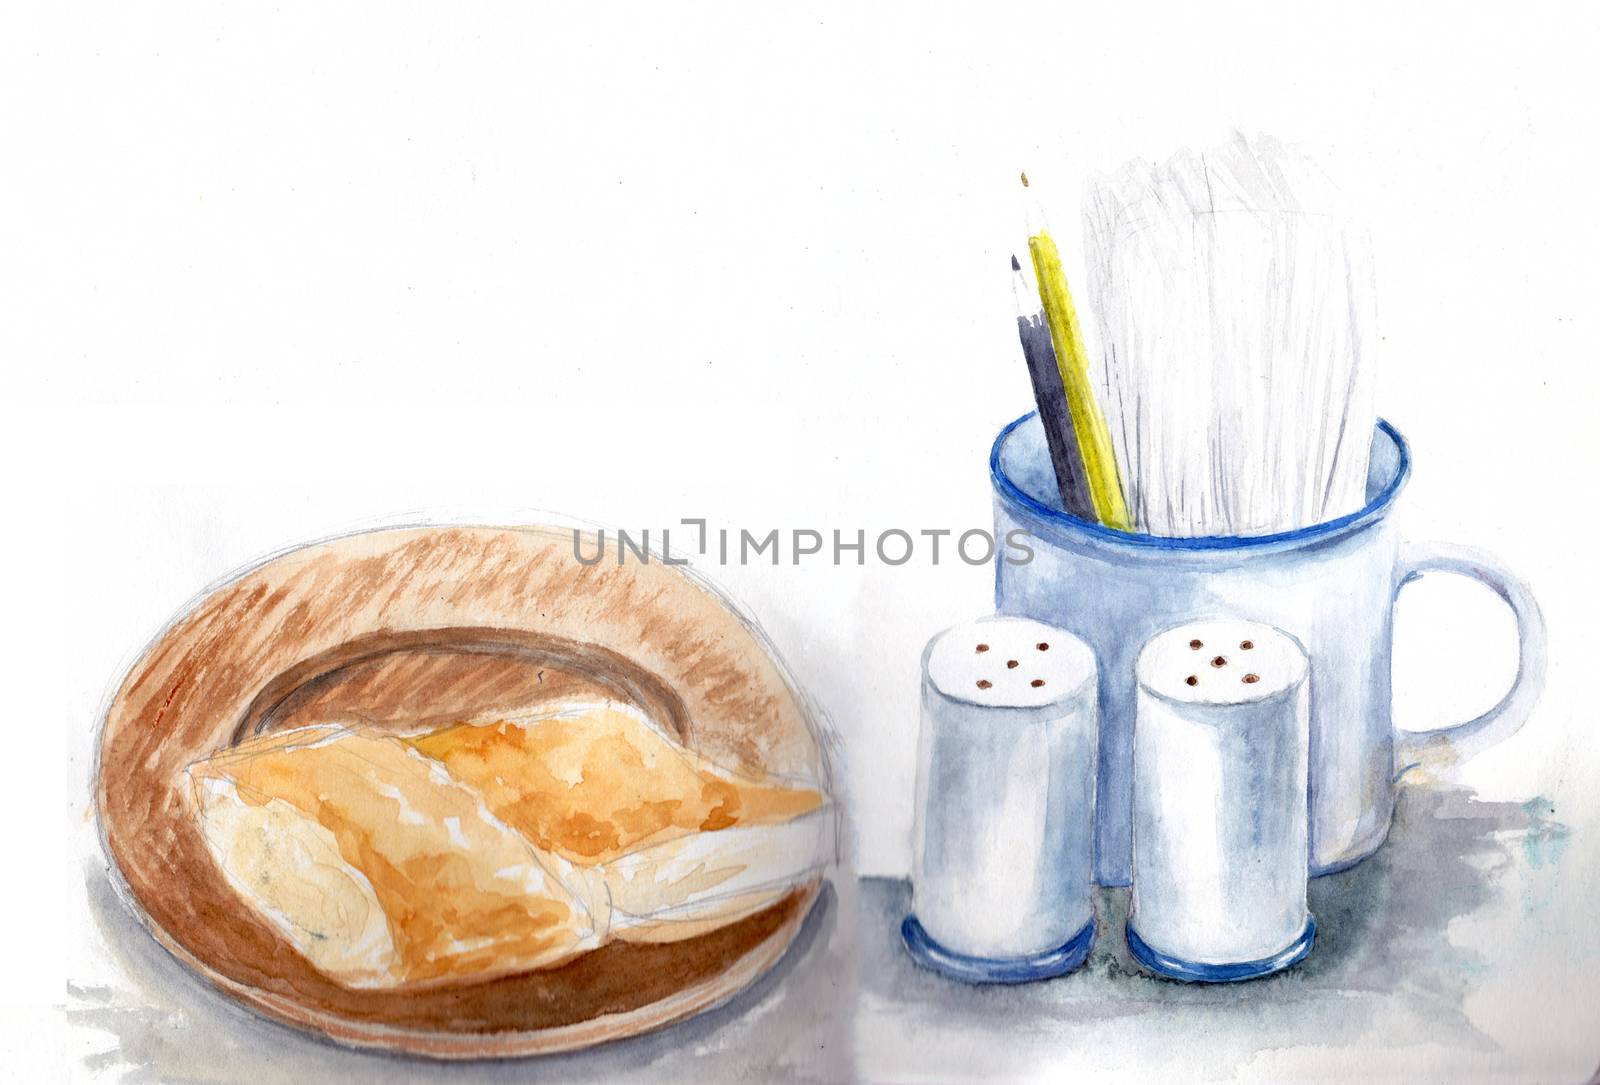 Hand Drawn Sketch from Cafe. Objects on table: Mug, salt and pepper, pastry bun on plate. Watercolor illustration by sshisshka